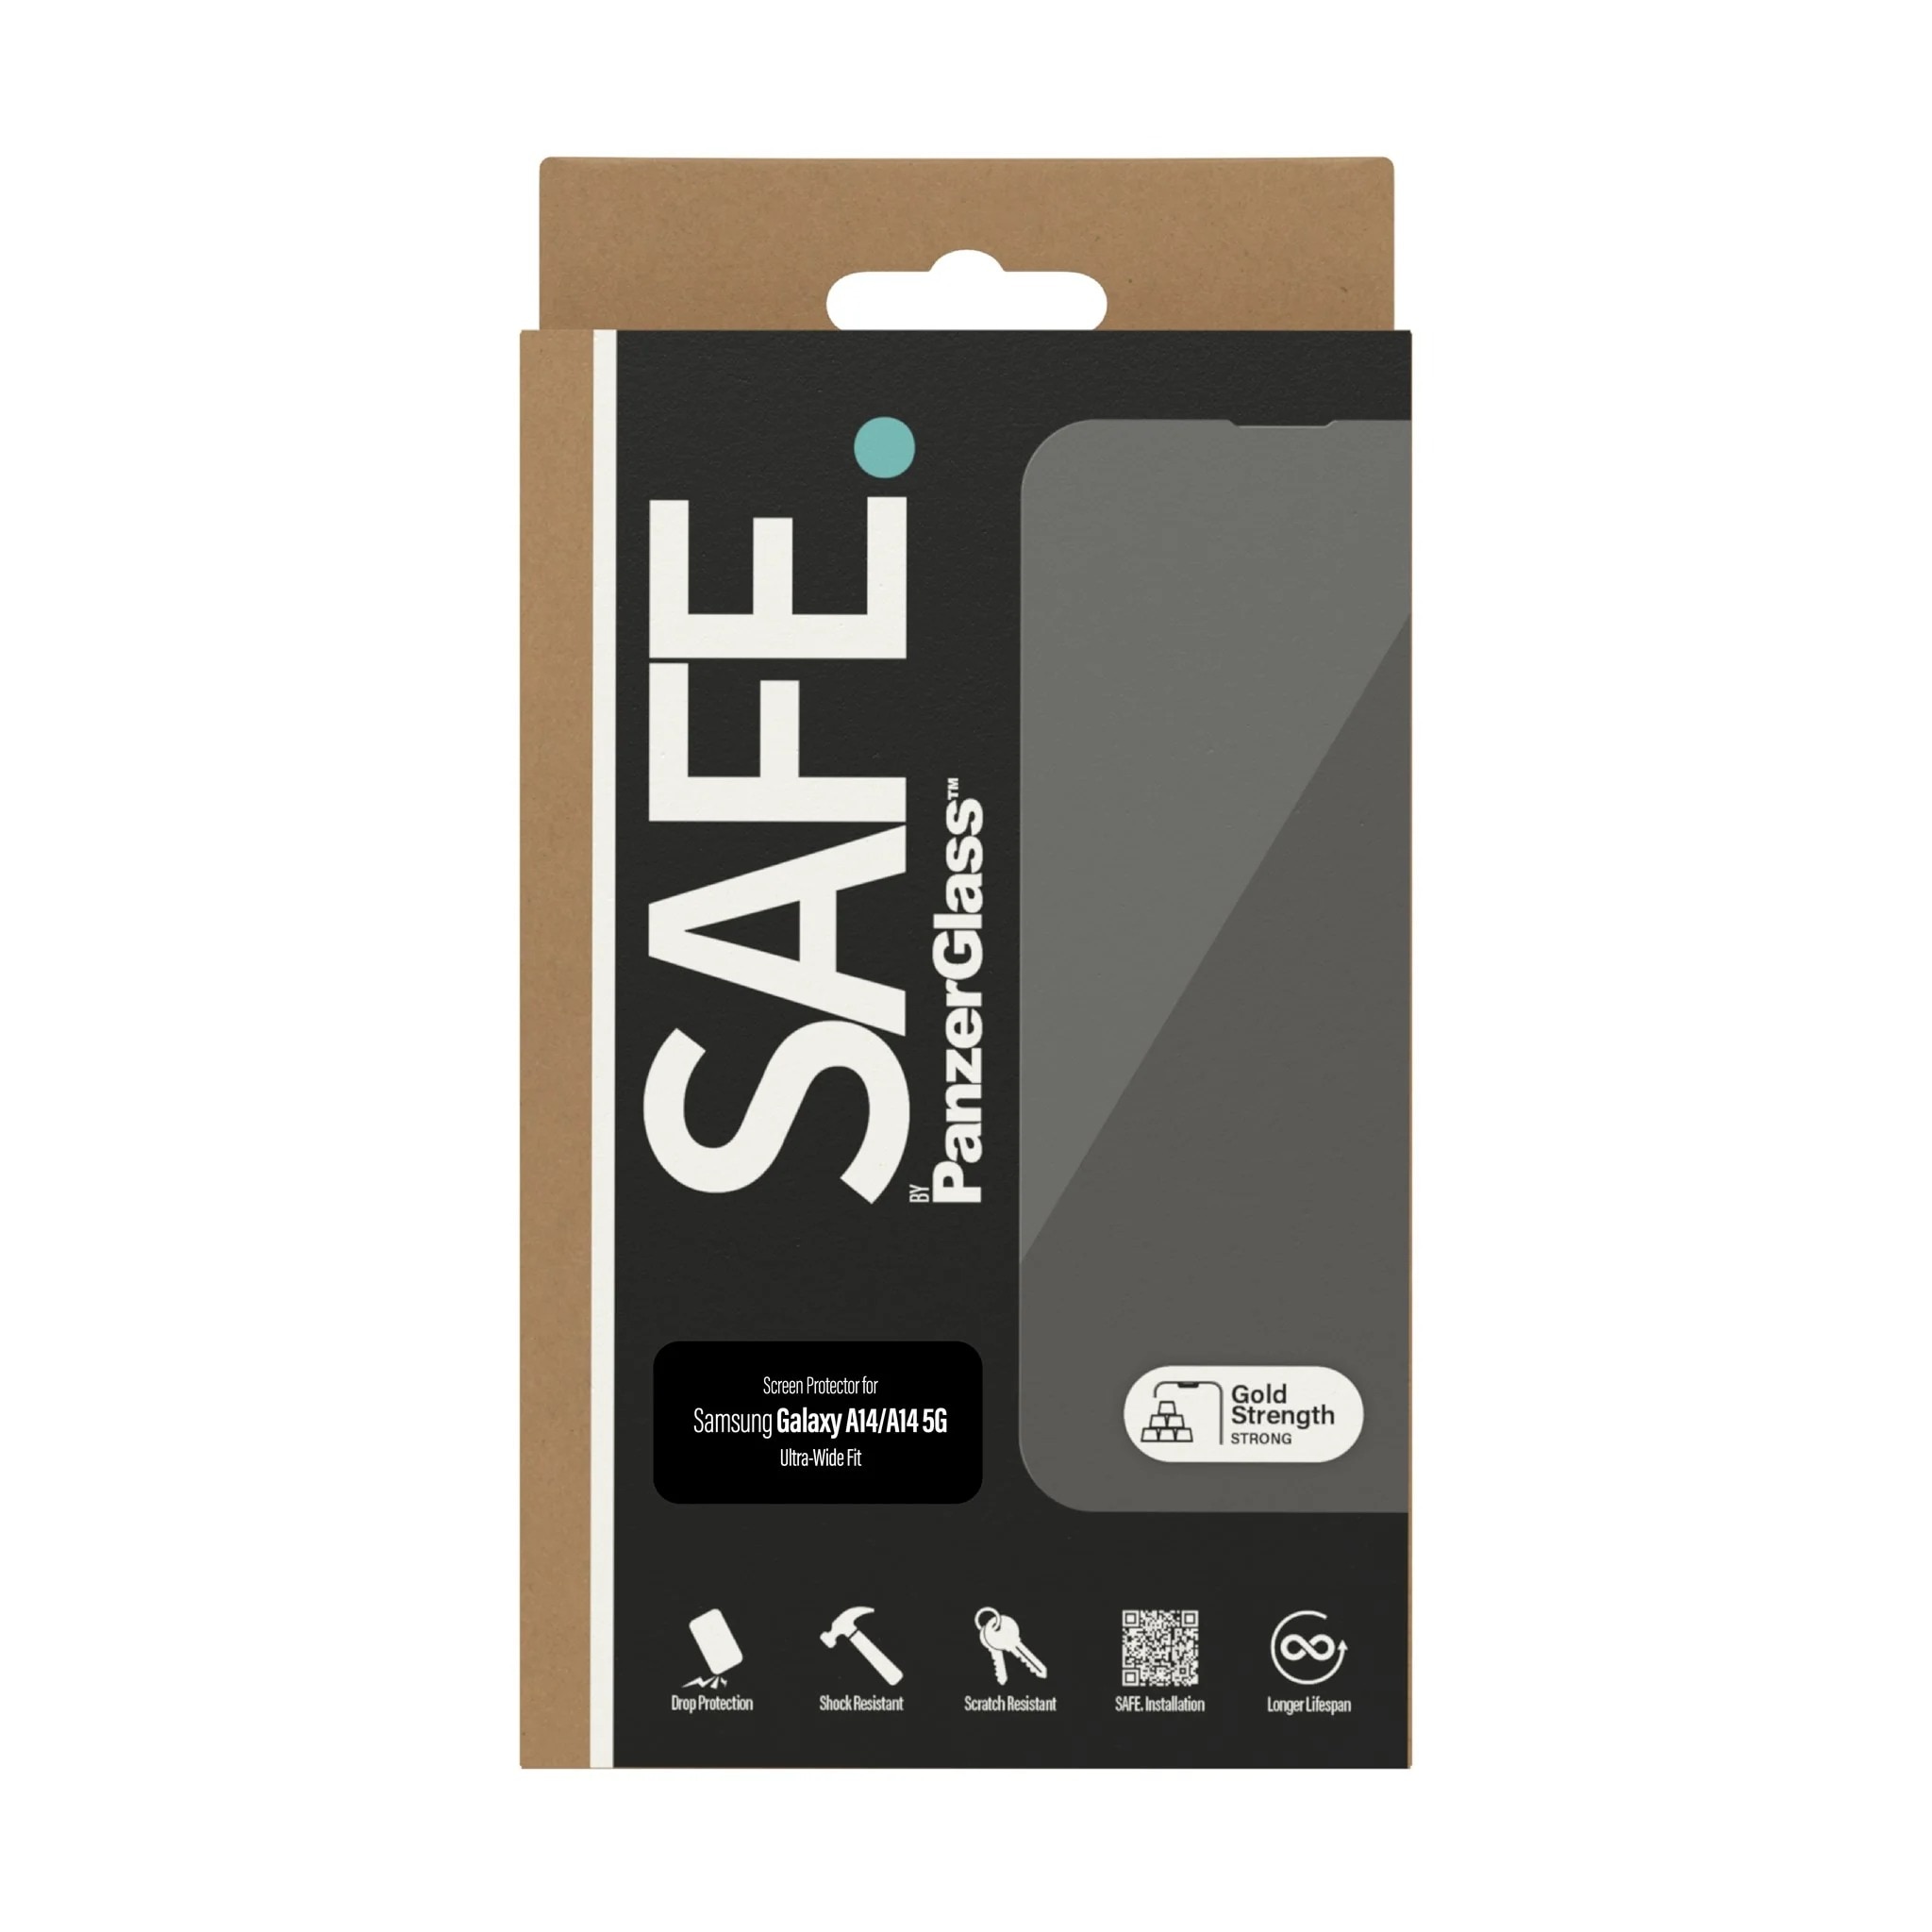 Samsung Galaxy A14 Screen Protector Ultra Wide Fit